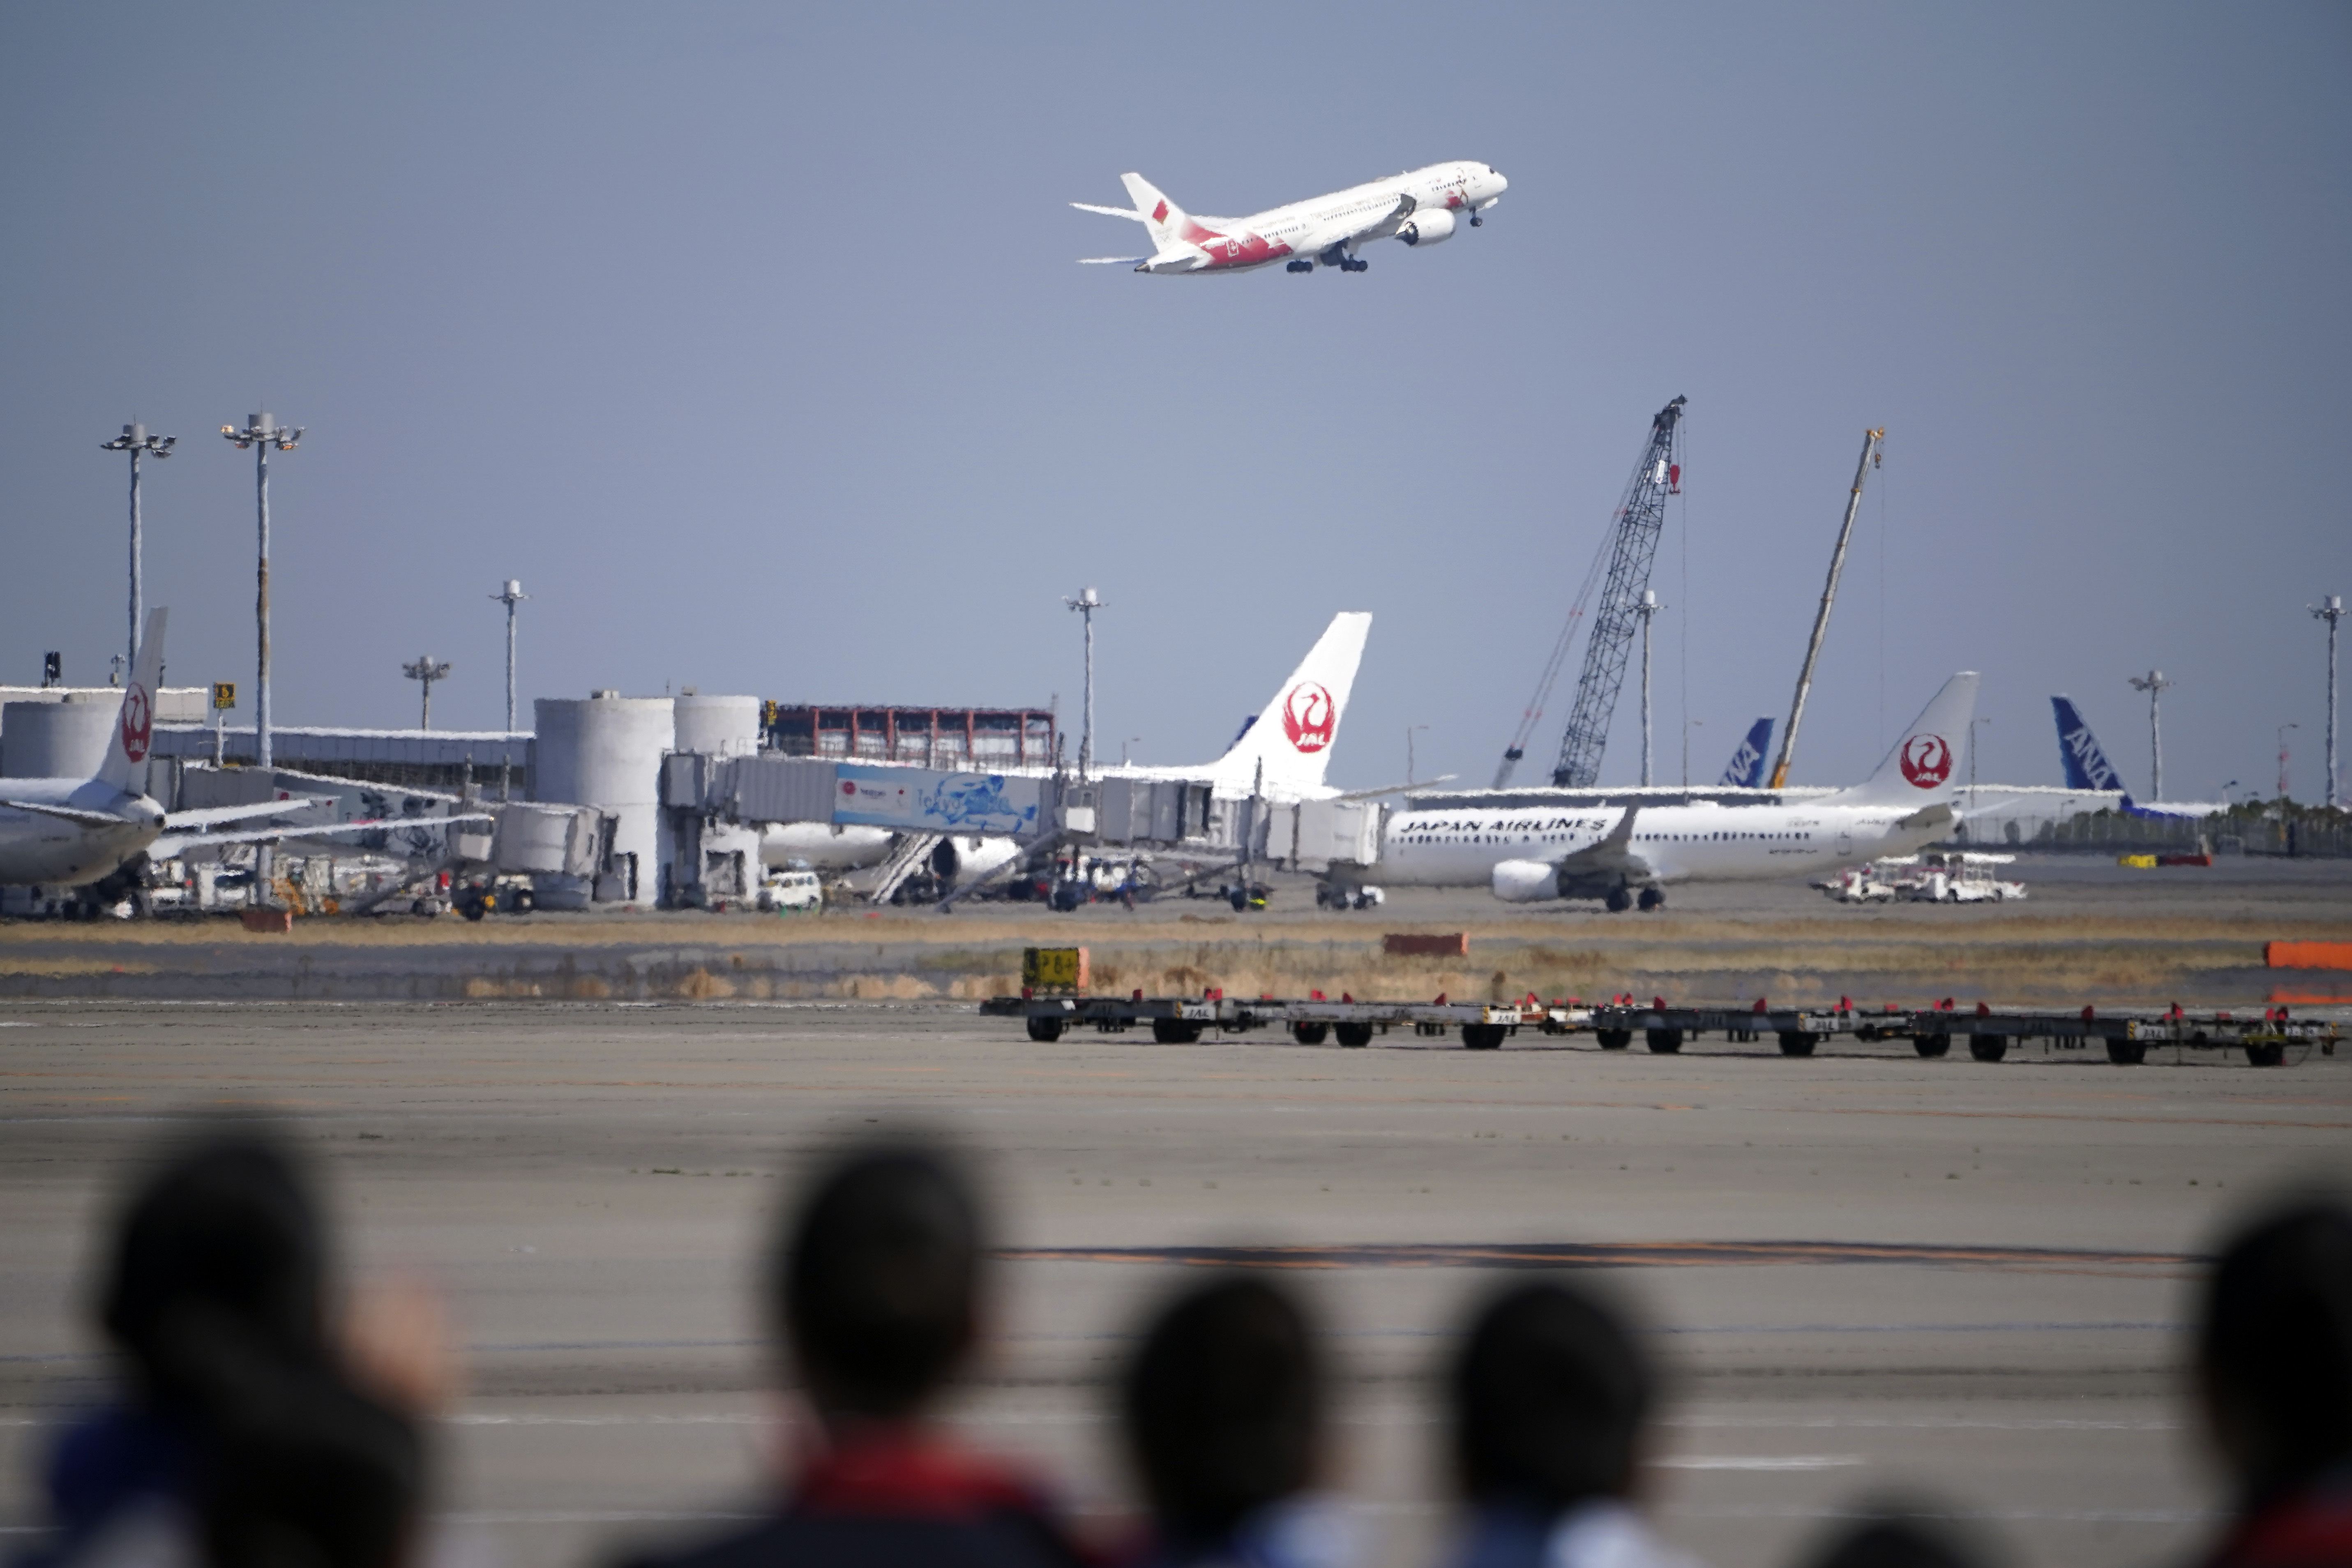 Ground crews of Japanese airlines observe the special "Tokyo 2020 Go" aircraft that will transport the Olympic Flame to Japan from Greece, on its departure at Haneda International Airport in Tokyo Wednesday, March 18, 2020. (AP Photo/Eugene Hoshiko)